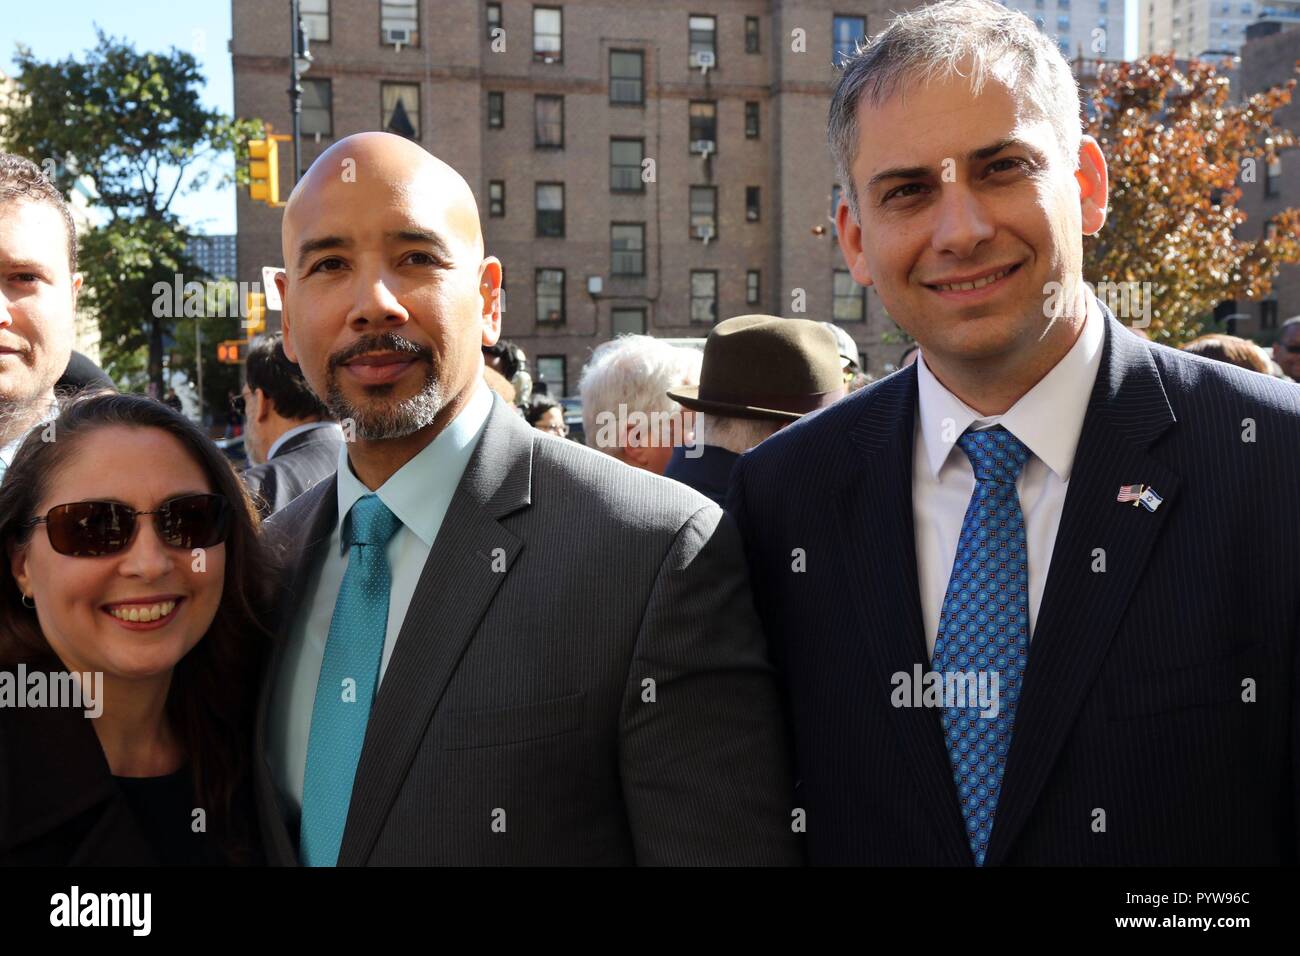 New York City, New York, USA. 30th Oct, 2018. An interfaith pray vigil hosted by Bronx Borough President Ruben Diaz Jr. and the Jewish Community Relations Council of New York, was held at the Bronx County Building on 30 October, 2018. Elected leaders, clergy, court officials, community organizations and others joined in support with the Jewish community and stood united against hatred at the midday vigil. Pictures is Borough President Ruben Diaz Jr. (L) and Deputy Consul General of Israel to New York, Israel Nitzan. Credit: G. Ronald Lopez/ZUMA Wire/Alamy Live News Stock Photo